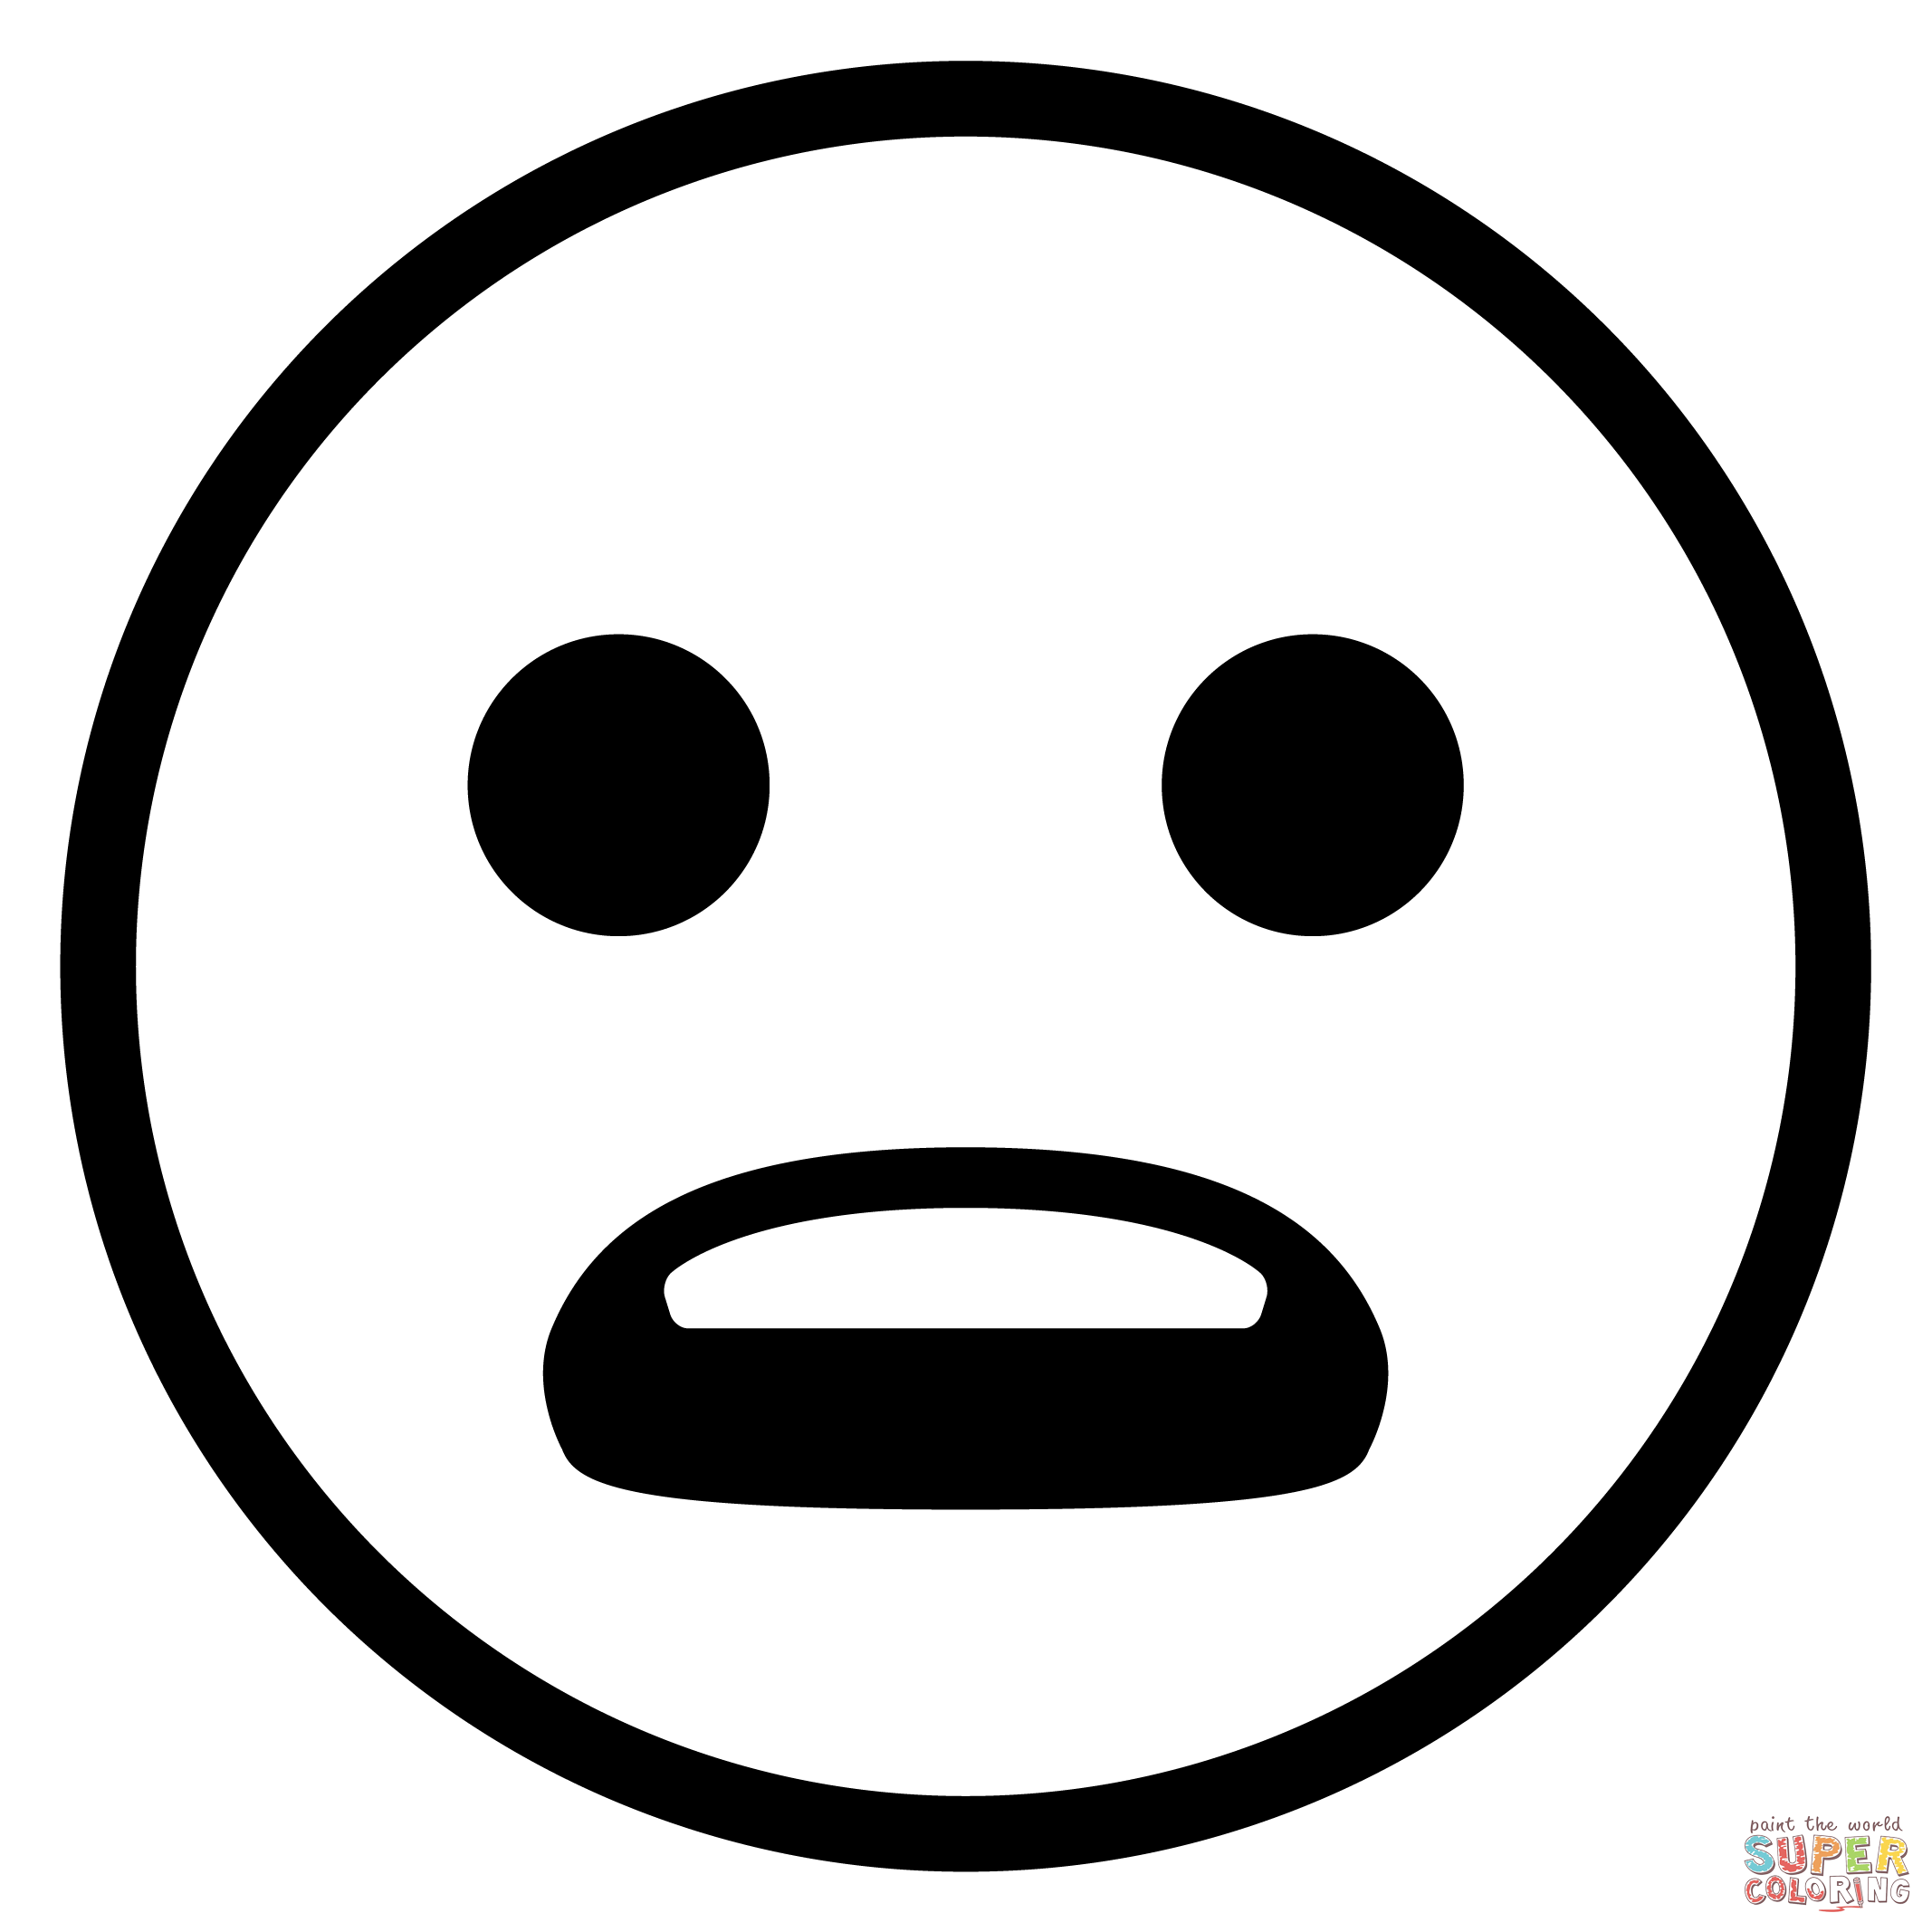 Frowning face with open mouth emoji coloring page free printable coloring pages